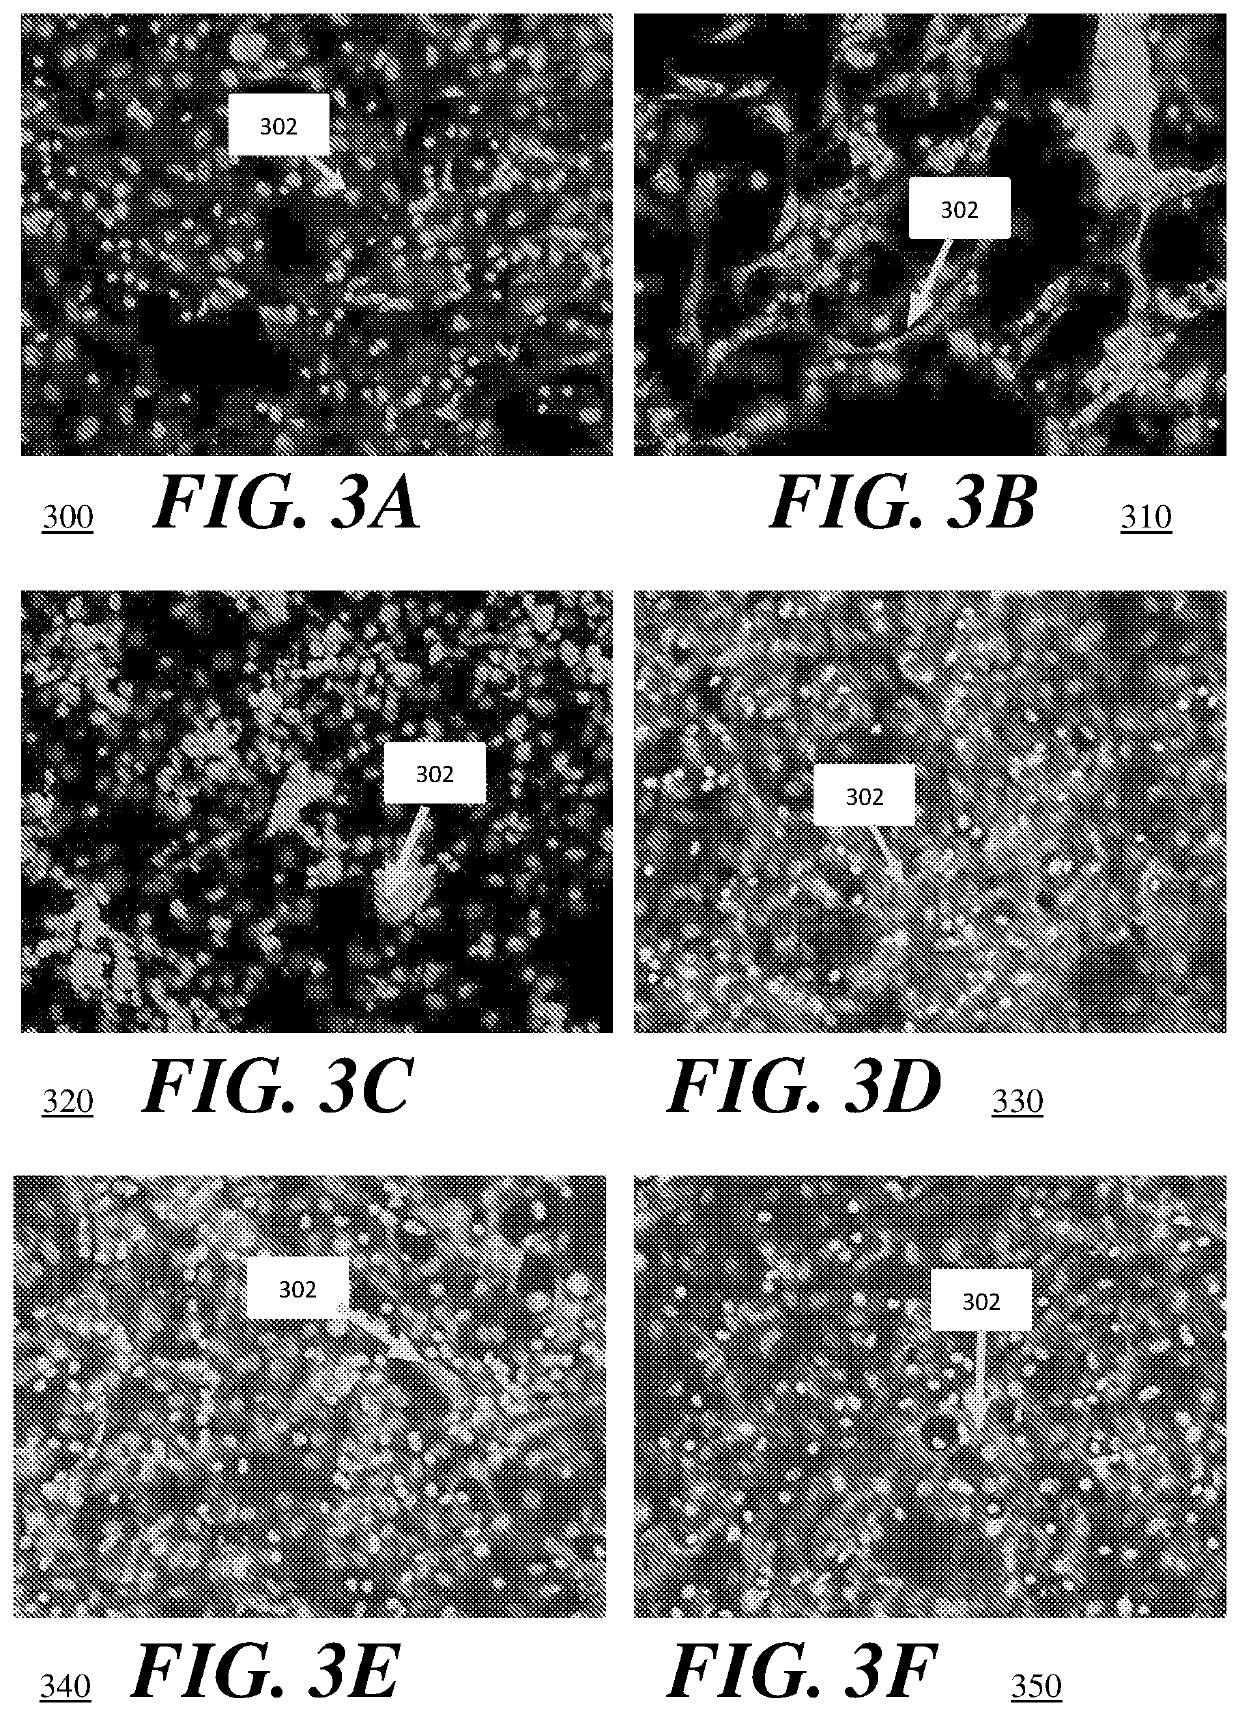 High throughput method for accurate prediction of compound-induced liver injury